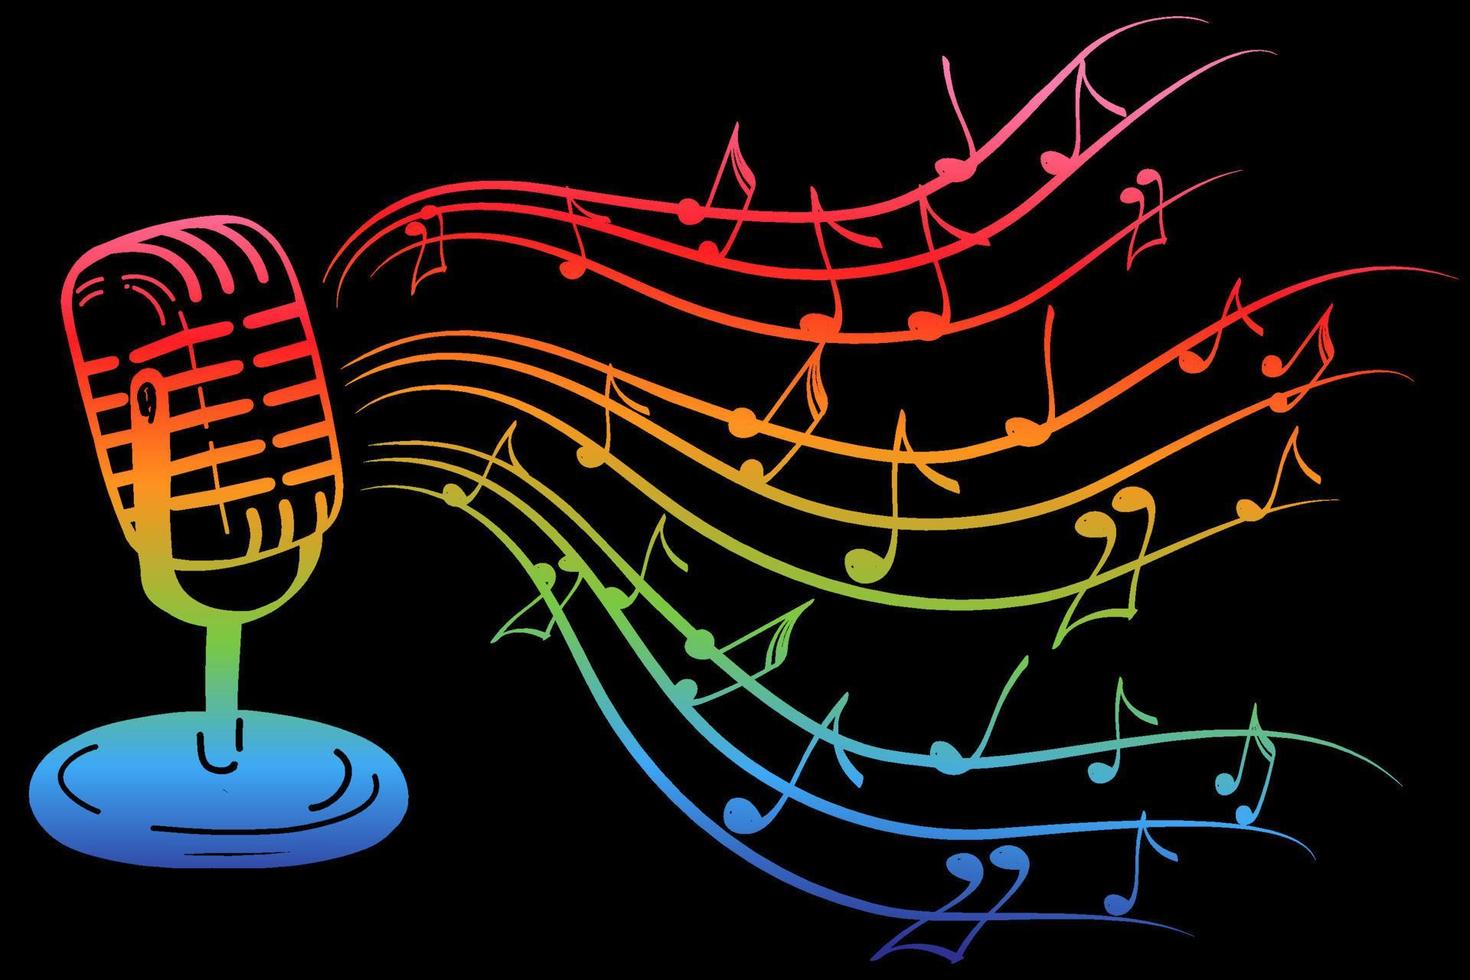 Karaoke music icon in doodle style. Vintage microphone with notes vector cartoon illustration on black isolated background. Audio equipment concept with bright rainbow melody effect